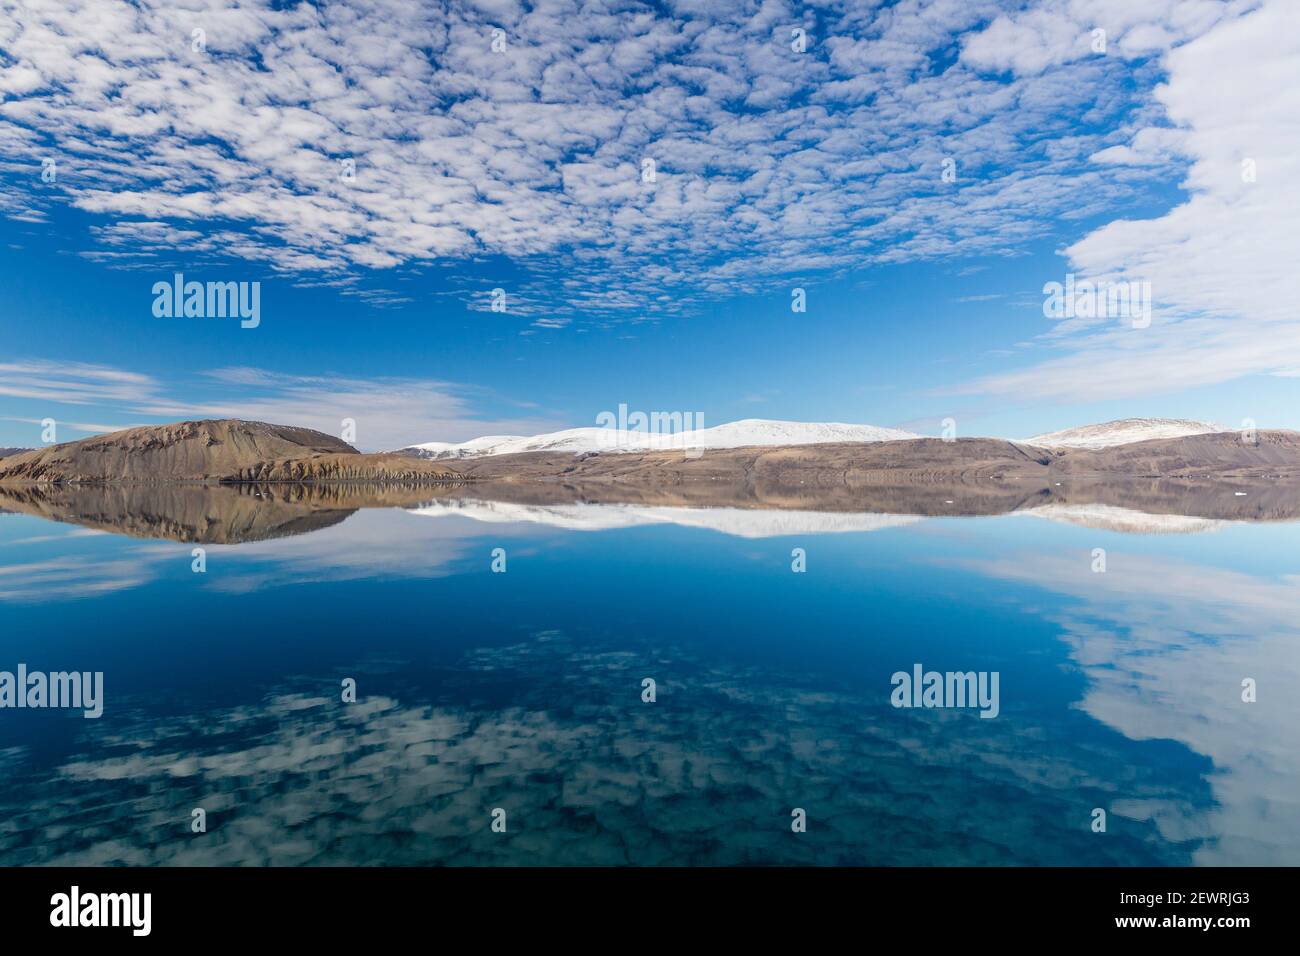 Reflections in the calm waters of Makinson Inlet, Ellesmere Island, Nunavut, Canada, North America Stock Photo